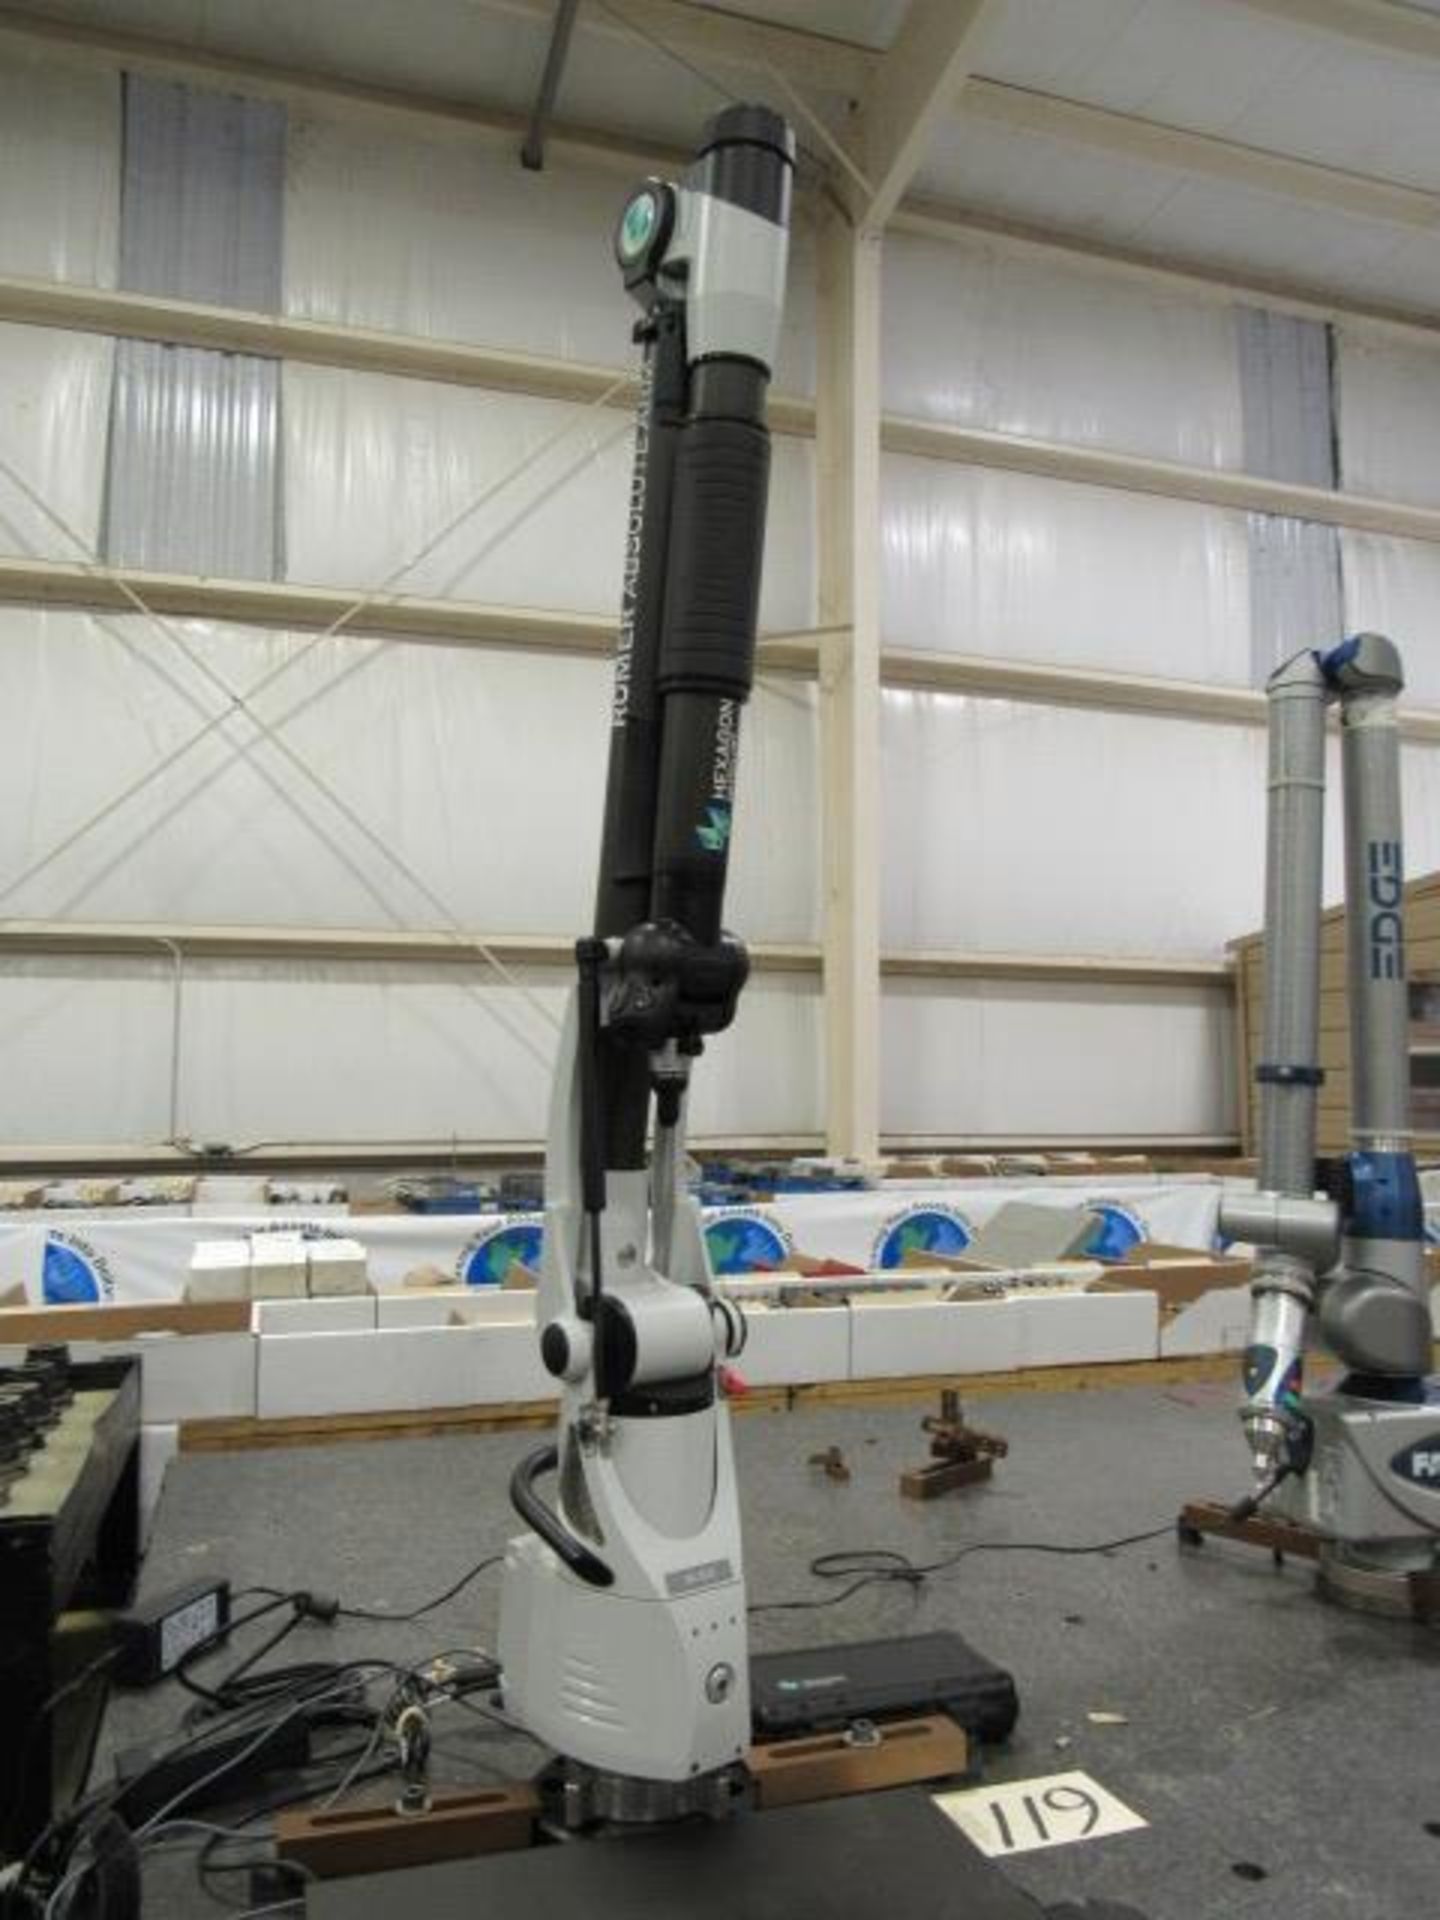 Romer Absolute Arm Model RA-7525-4 Portable Inspection Machine with Operating Laptop Computer, sn: - Image 2 of 7